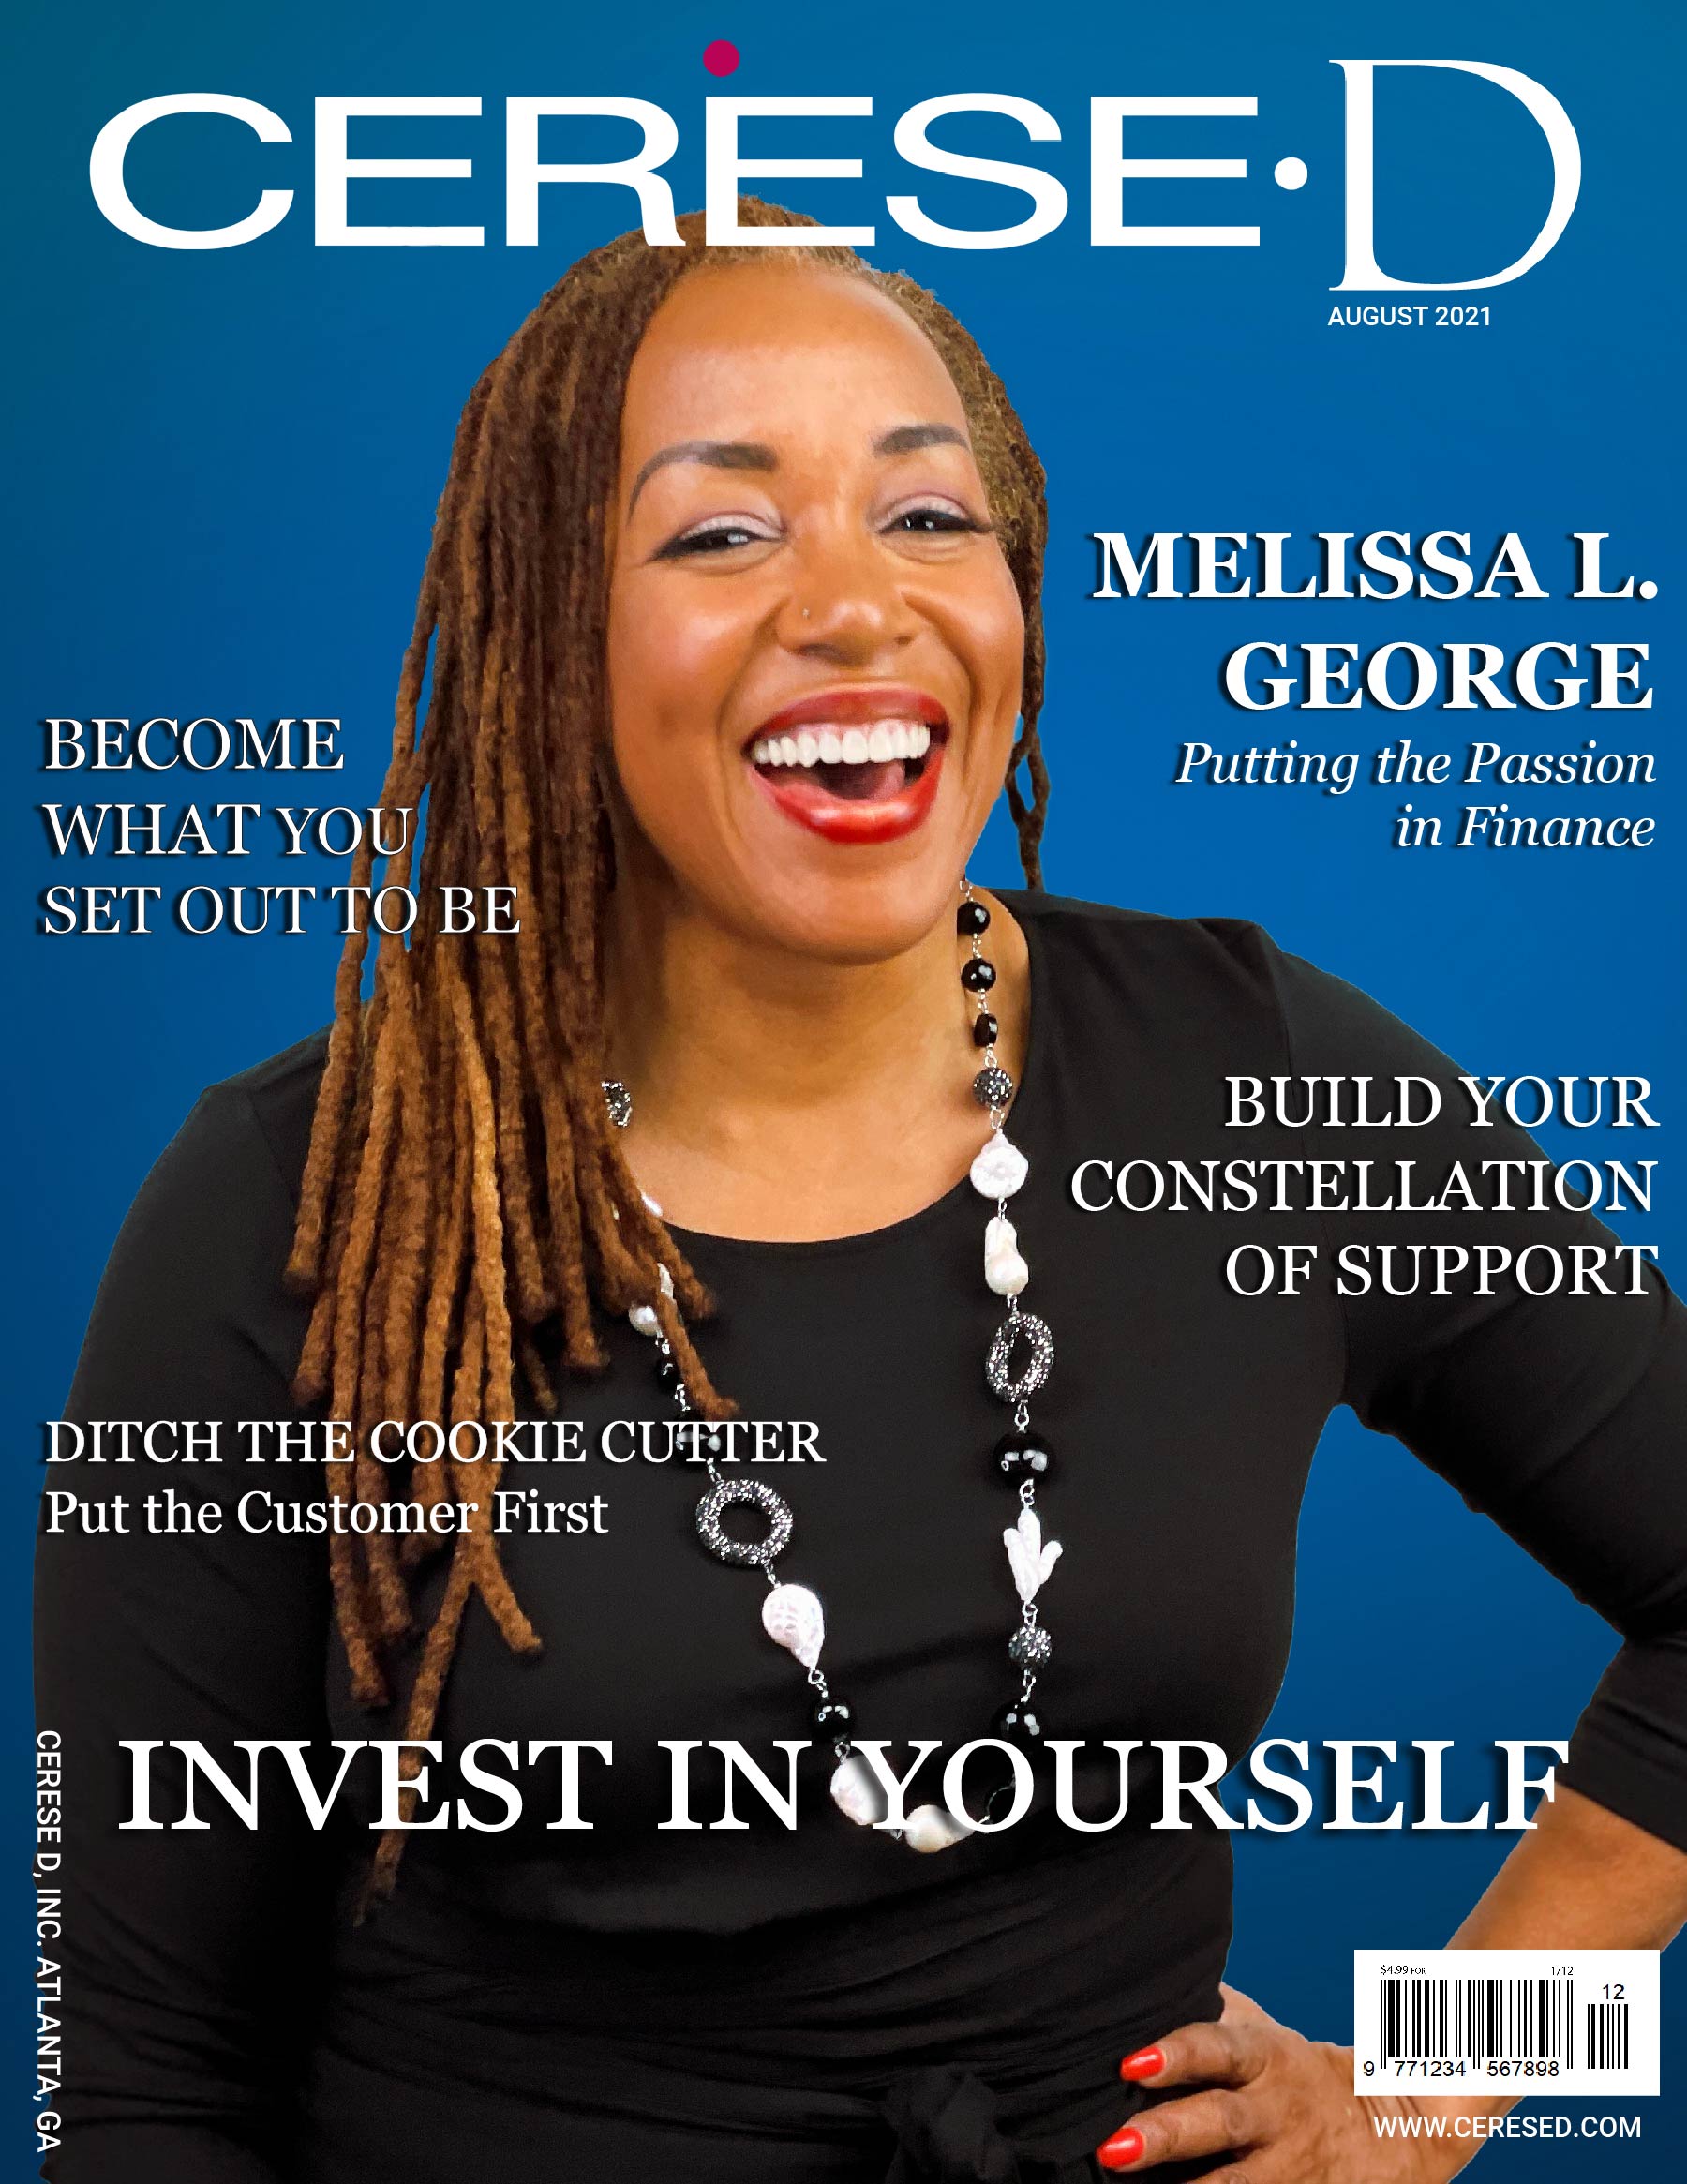 Smiling black woman in a black top wearing a beaded necklace on the cover of Cerese D Magazine